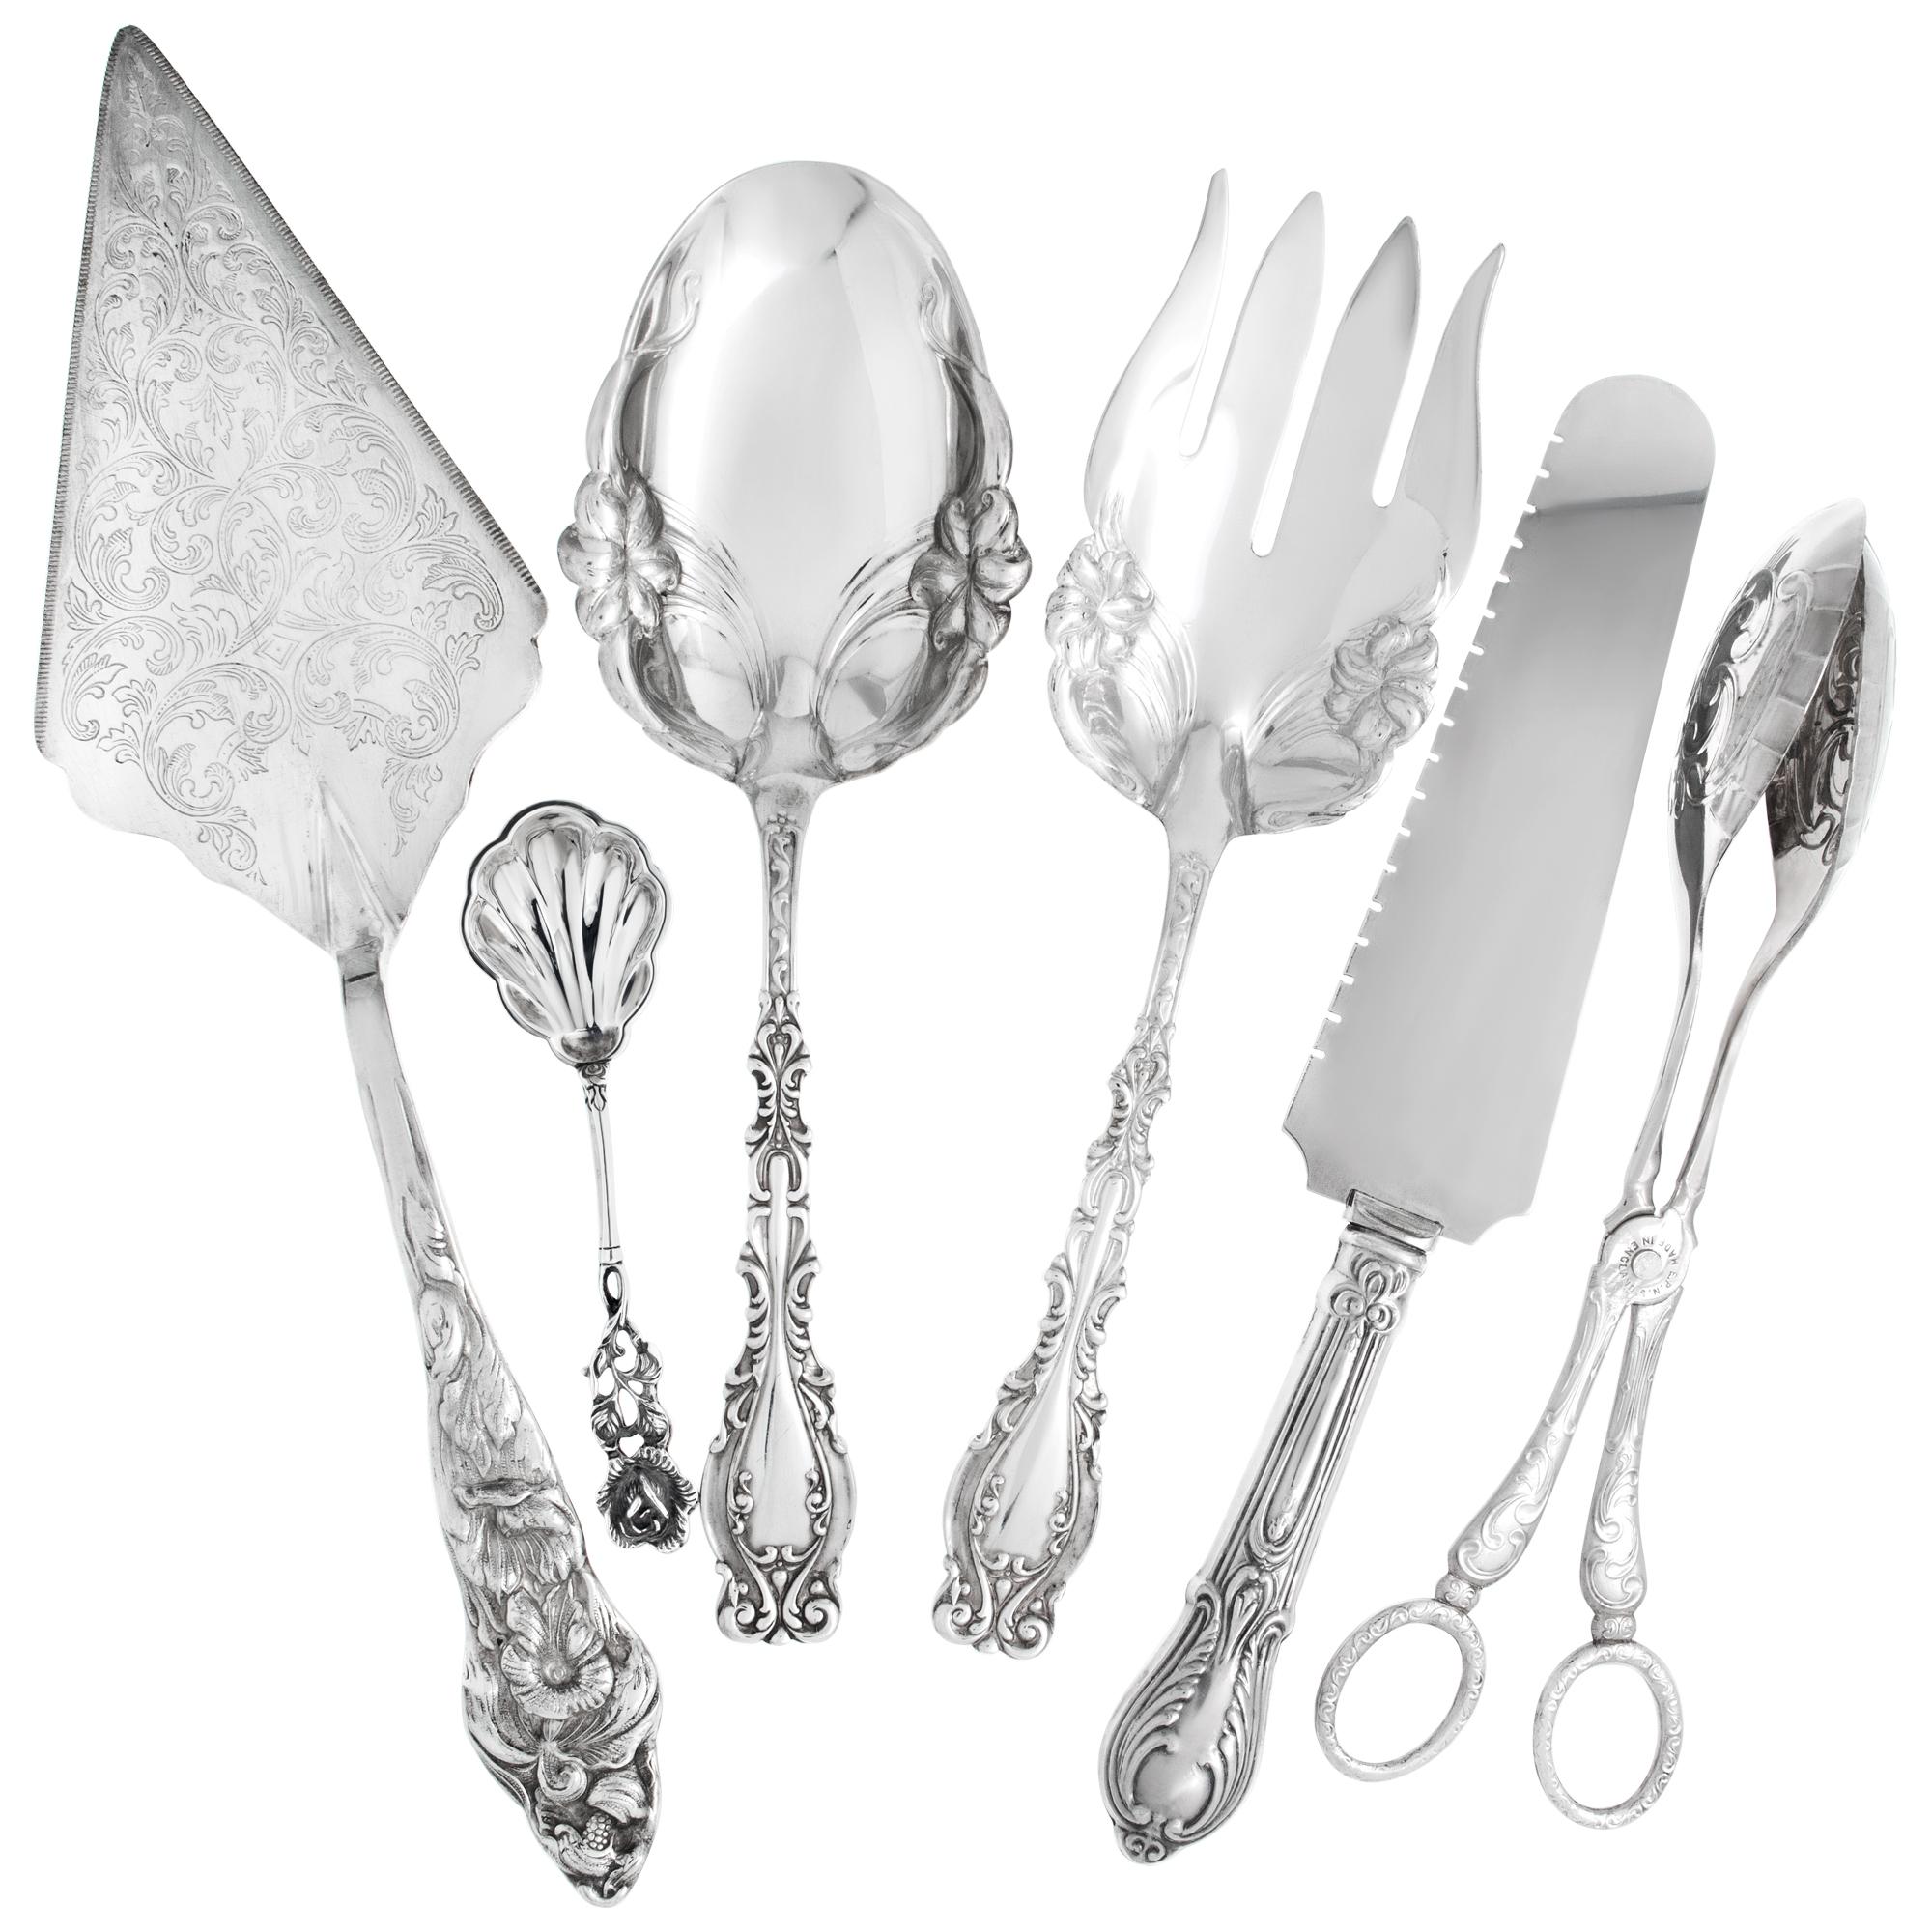 reed and barton sterling silverware set